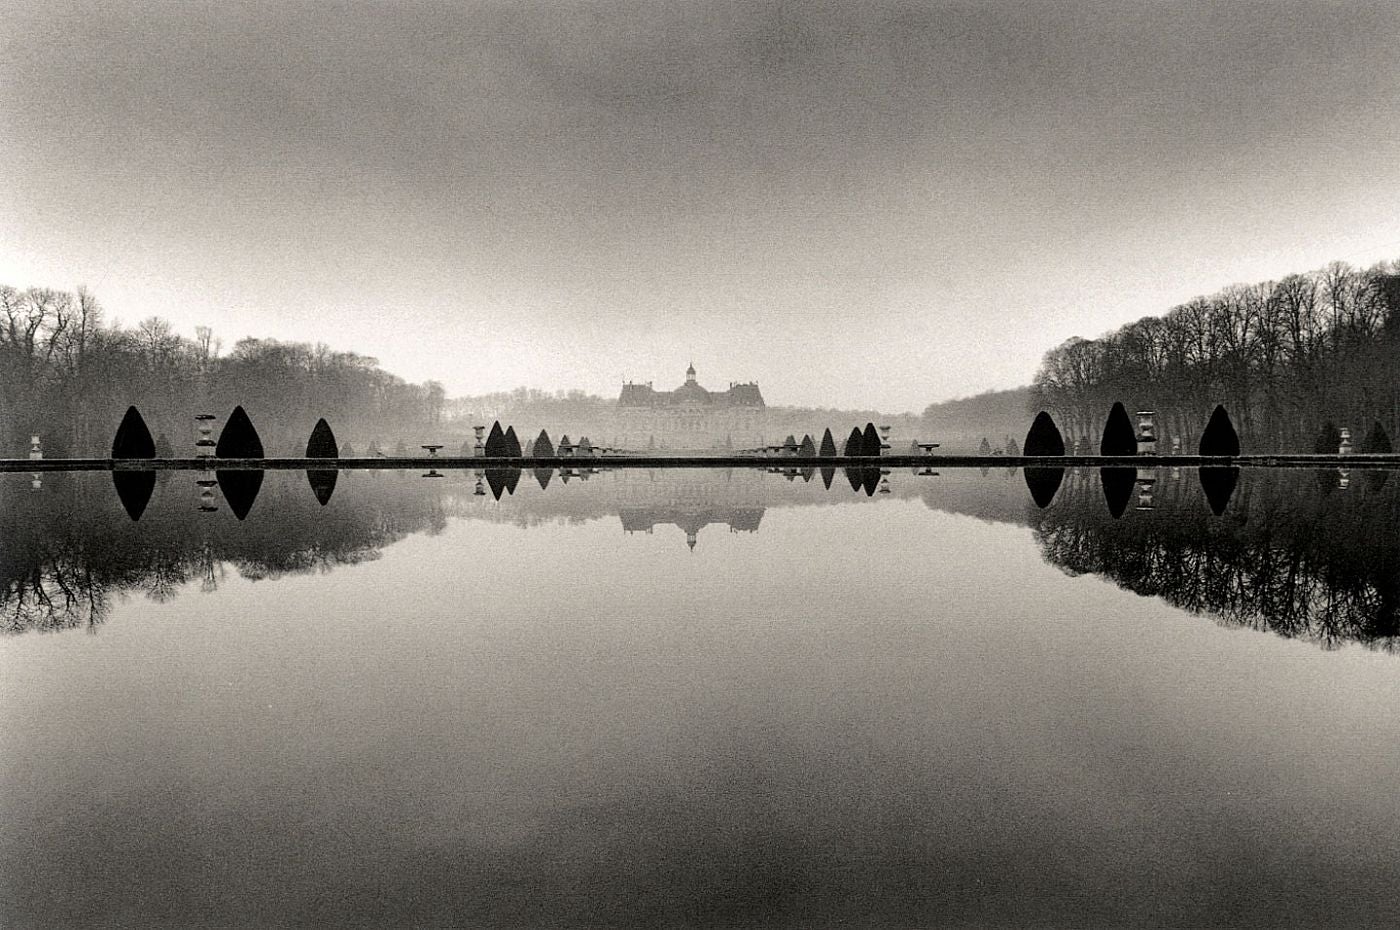 Michael Kenna: France, Limited Edition of 250 (in Clamshell Box) [SIGNED]